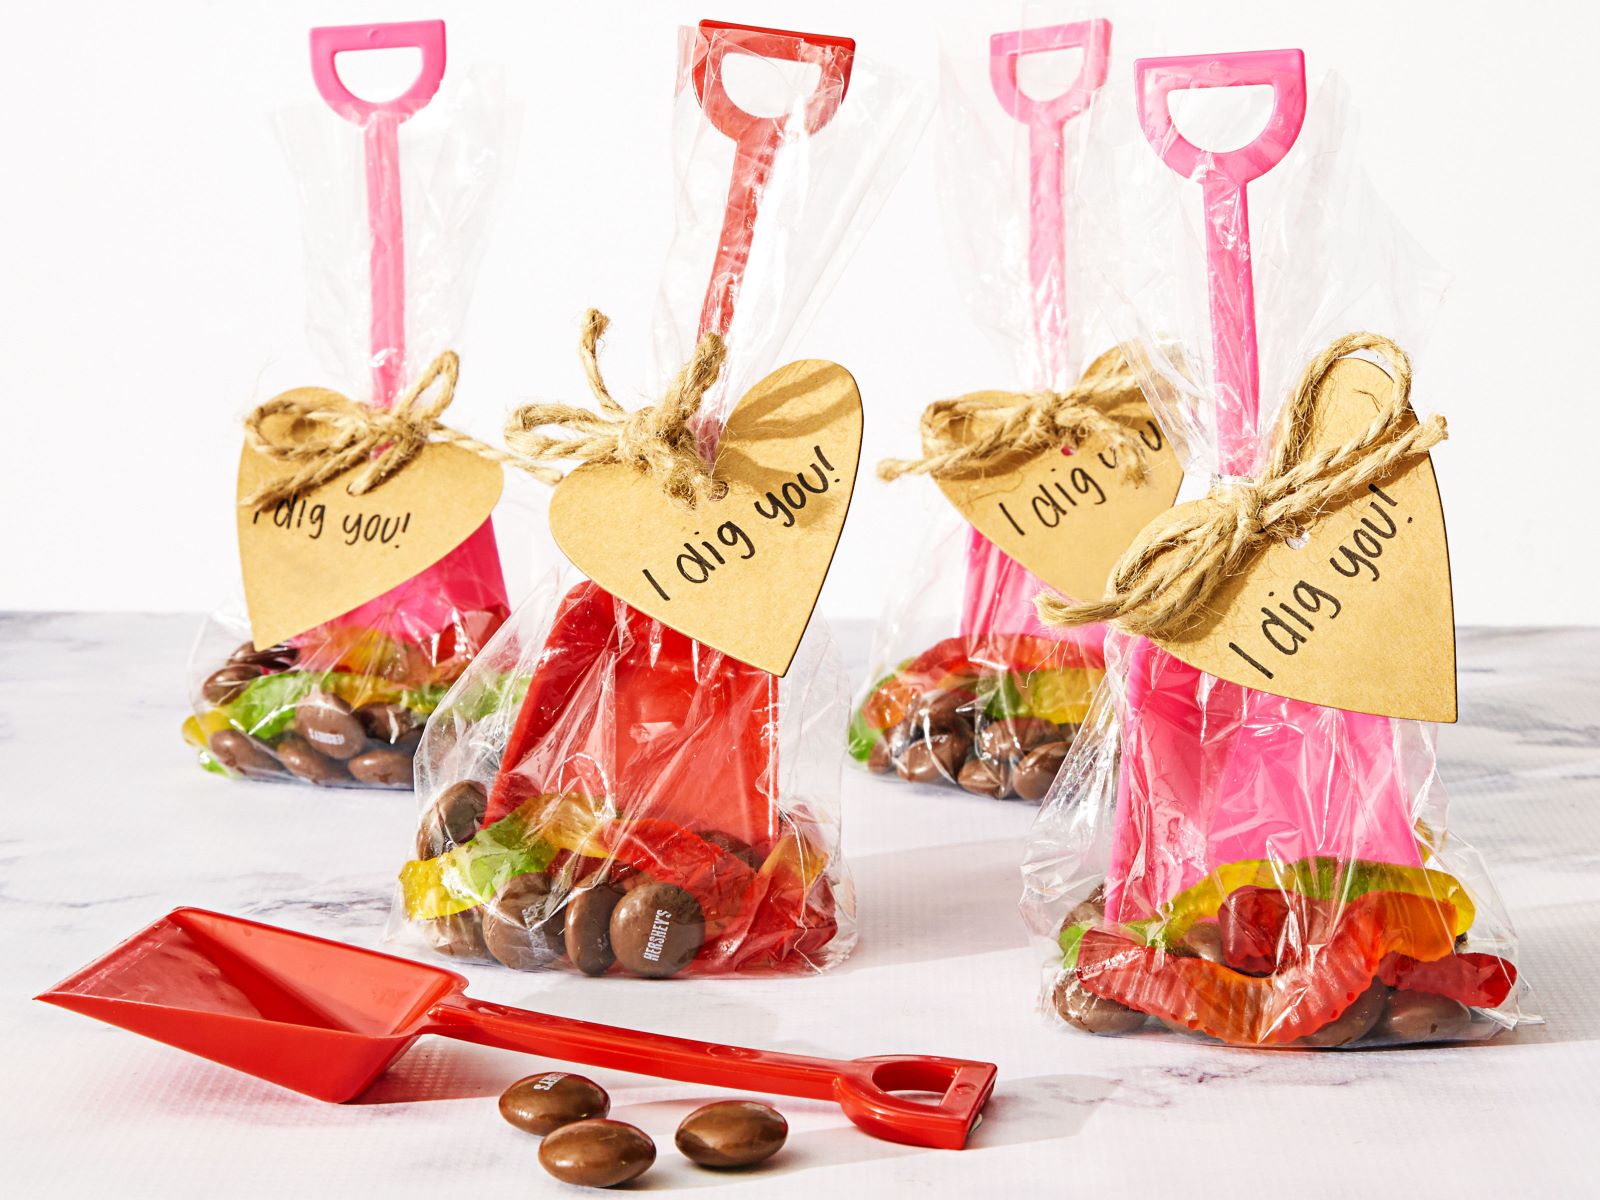 DIY Valentine's Day Goodie Bags: Creative Home Improvement Ideas For A Romantic Touch